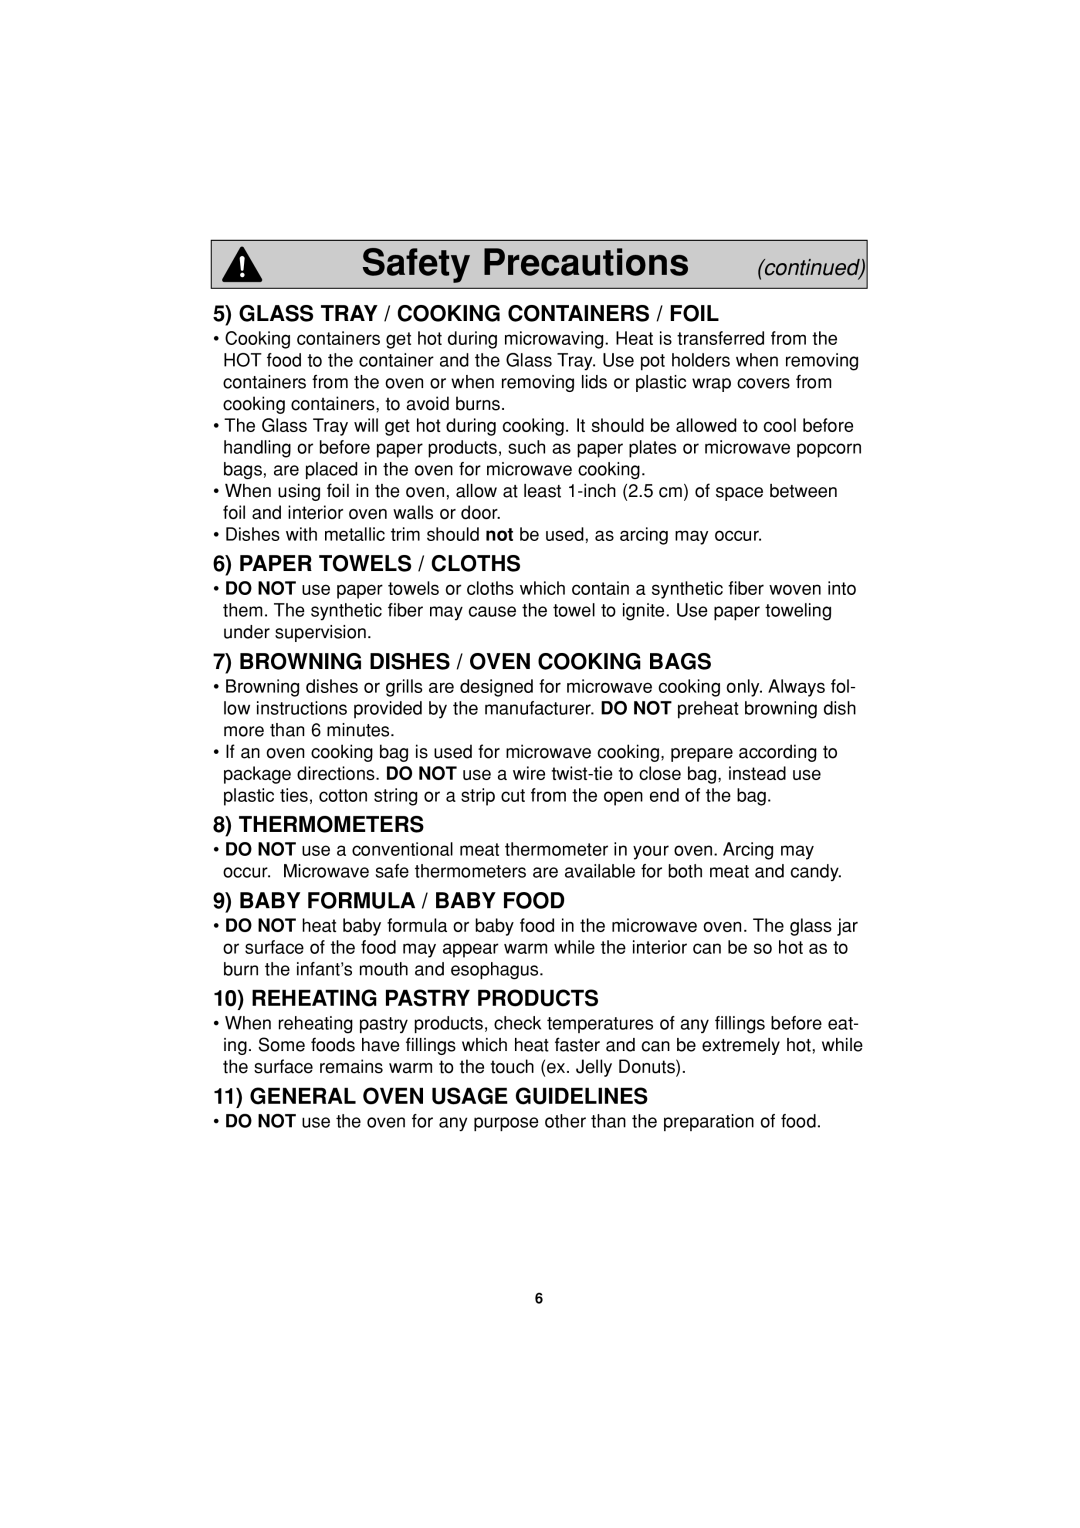 Panasonic NN-S334 Safety Precautions, Glass Tray / Cooking Containers / Foil, Paper Towels / Cloths, Thermometers 